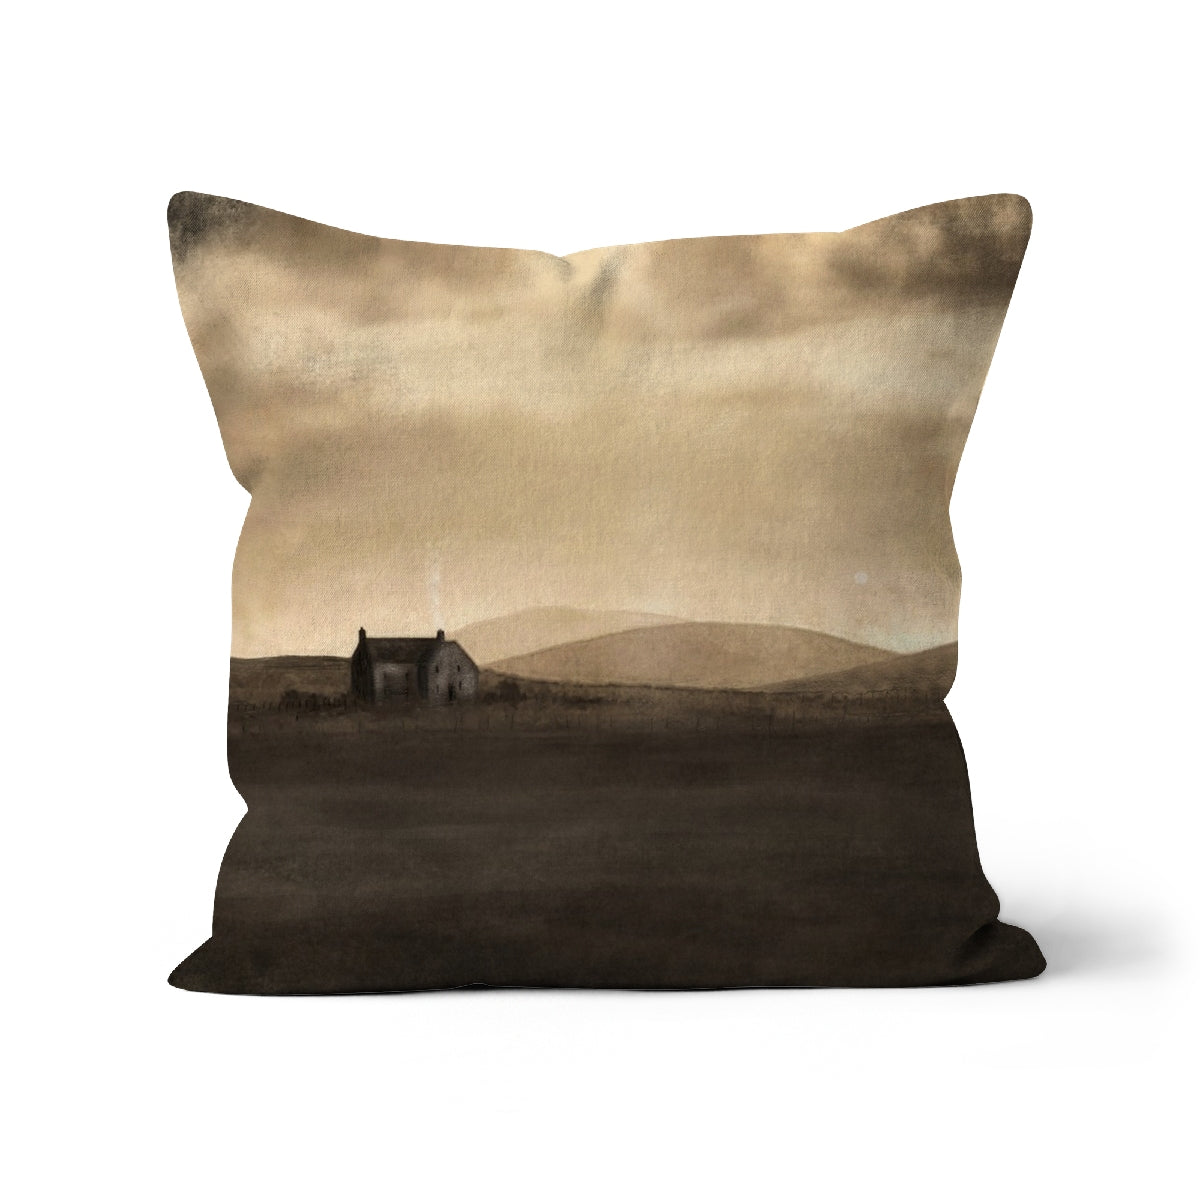 A Moonlit Croft Art Gifts Cushion-Cushions-Hebridean Islands Art Gallery-Canvas-18"x18"-Paintings, Prints, Homeware, Art Gifts From Scotland By Scottish Artist Kevin Hunter